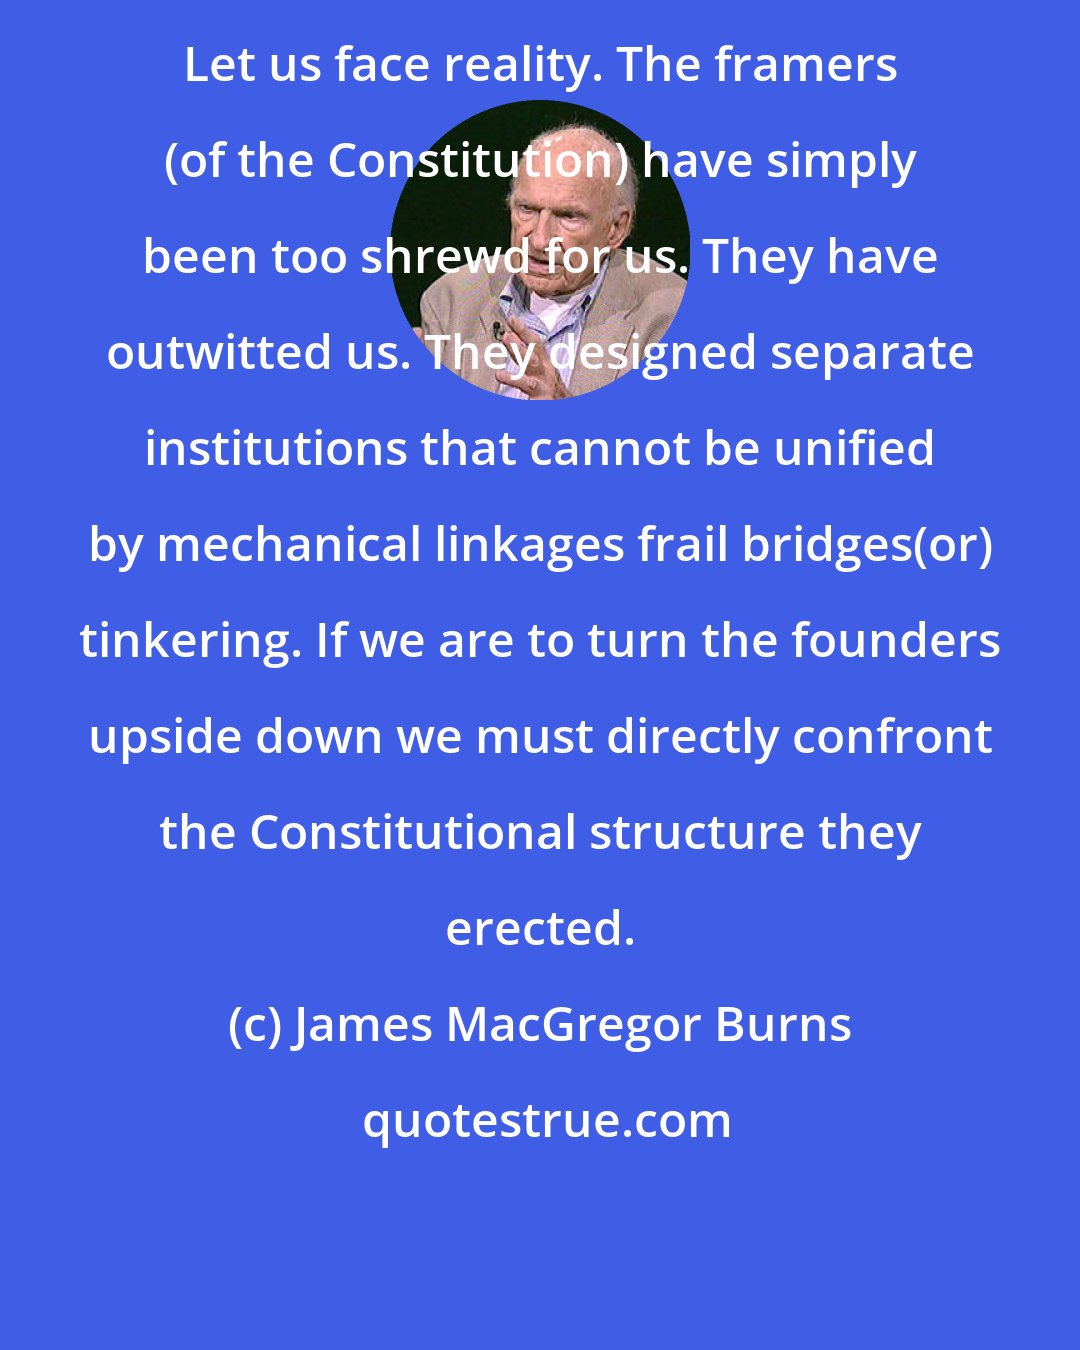 James MacGregor Burns: Let us face reality. The framers (of the Constitution) have simply been too shrewd for us. They have outwitted us. They designed separate institutions that cannot be unified by mechanical linkages frail bridges(or) tinkering. If we are to turn the founders upside down we must directly confront the Constitutional structure they erected.